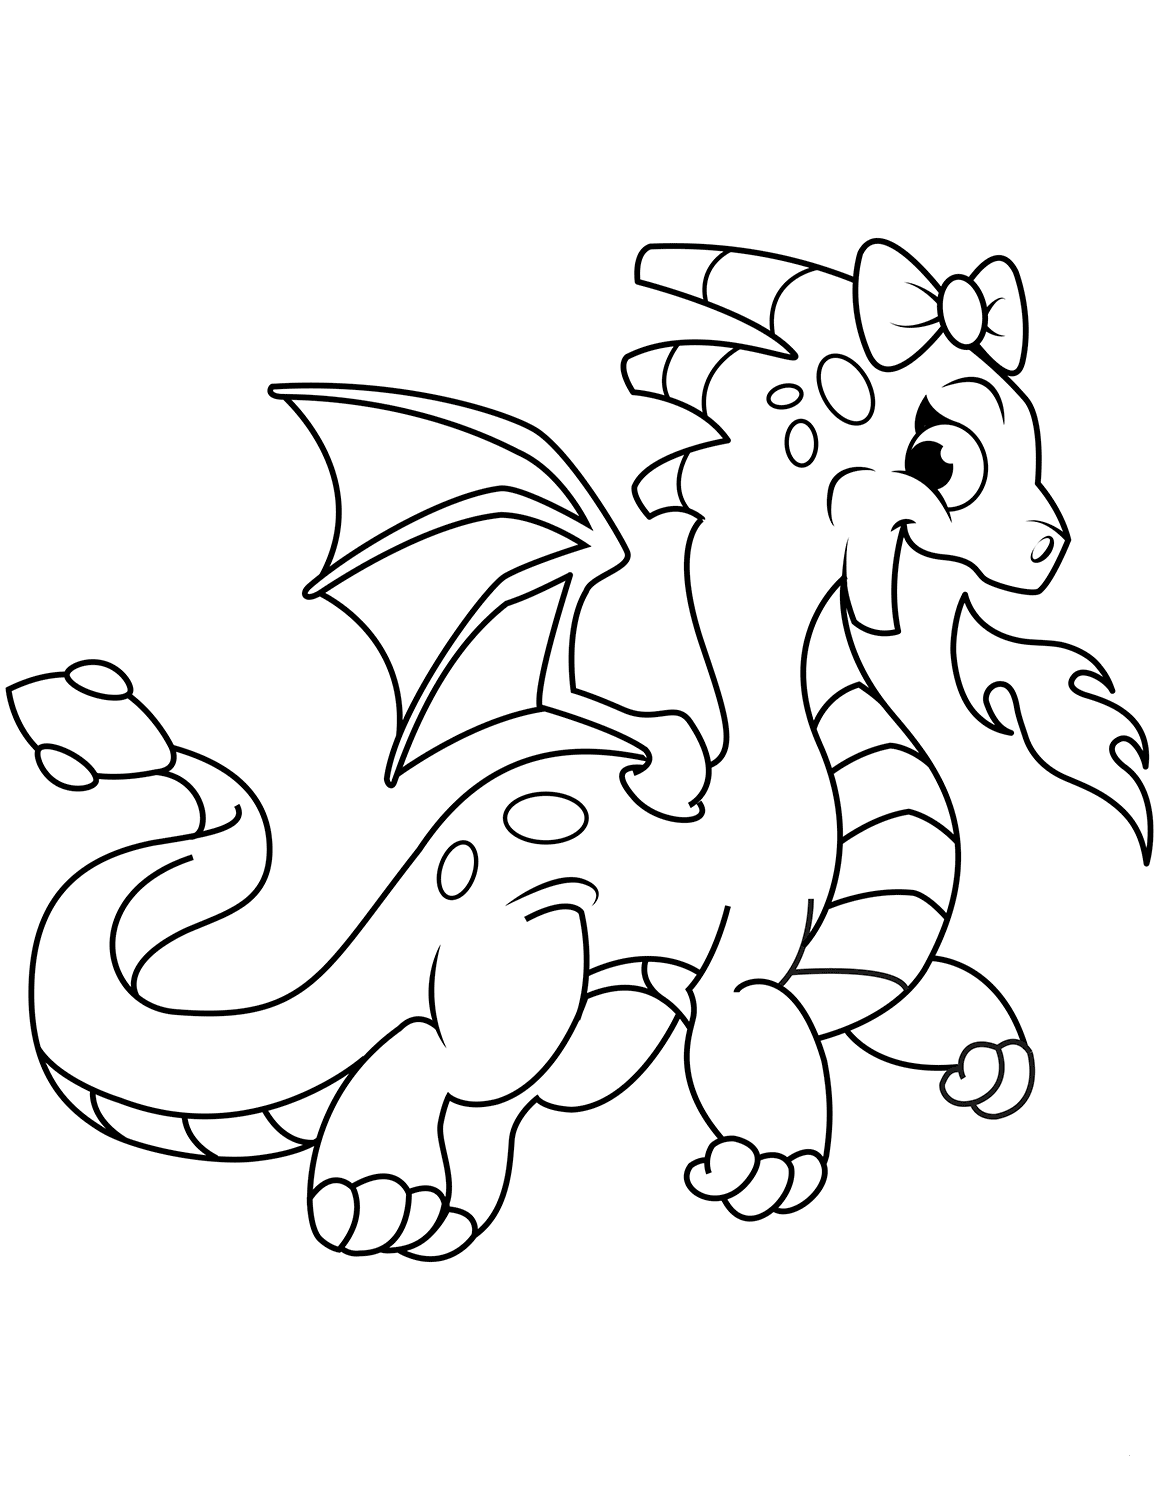 Fire Breathing Dragon Coloring Page